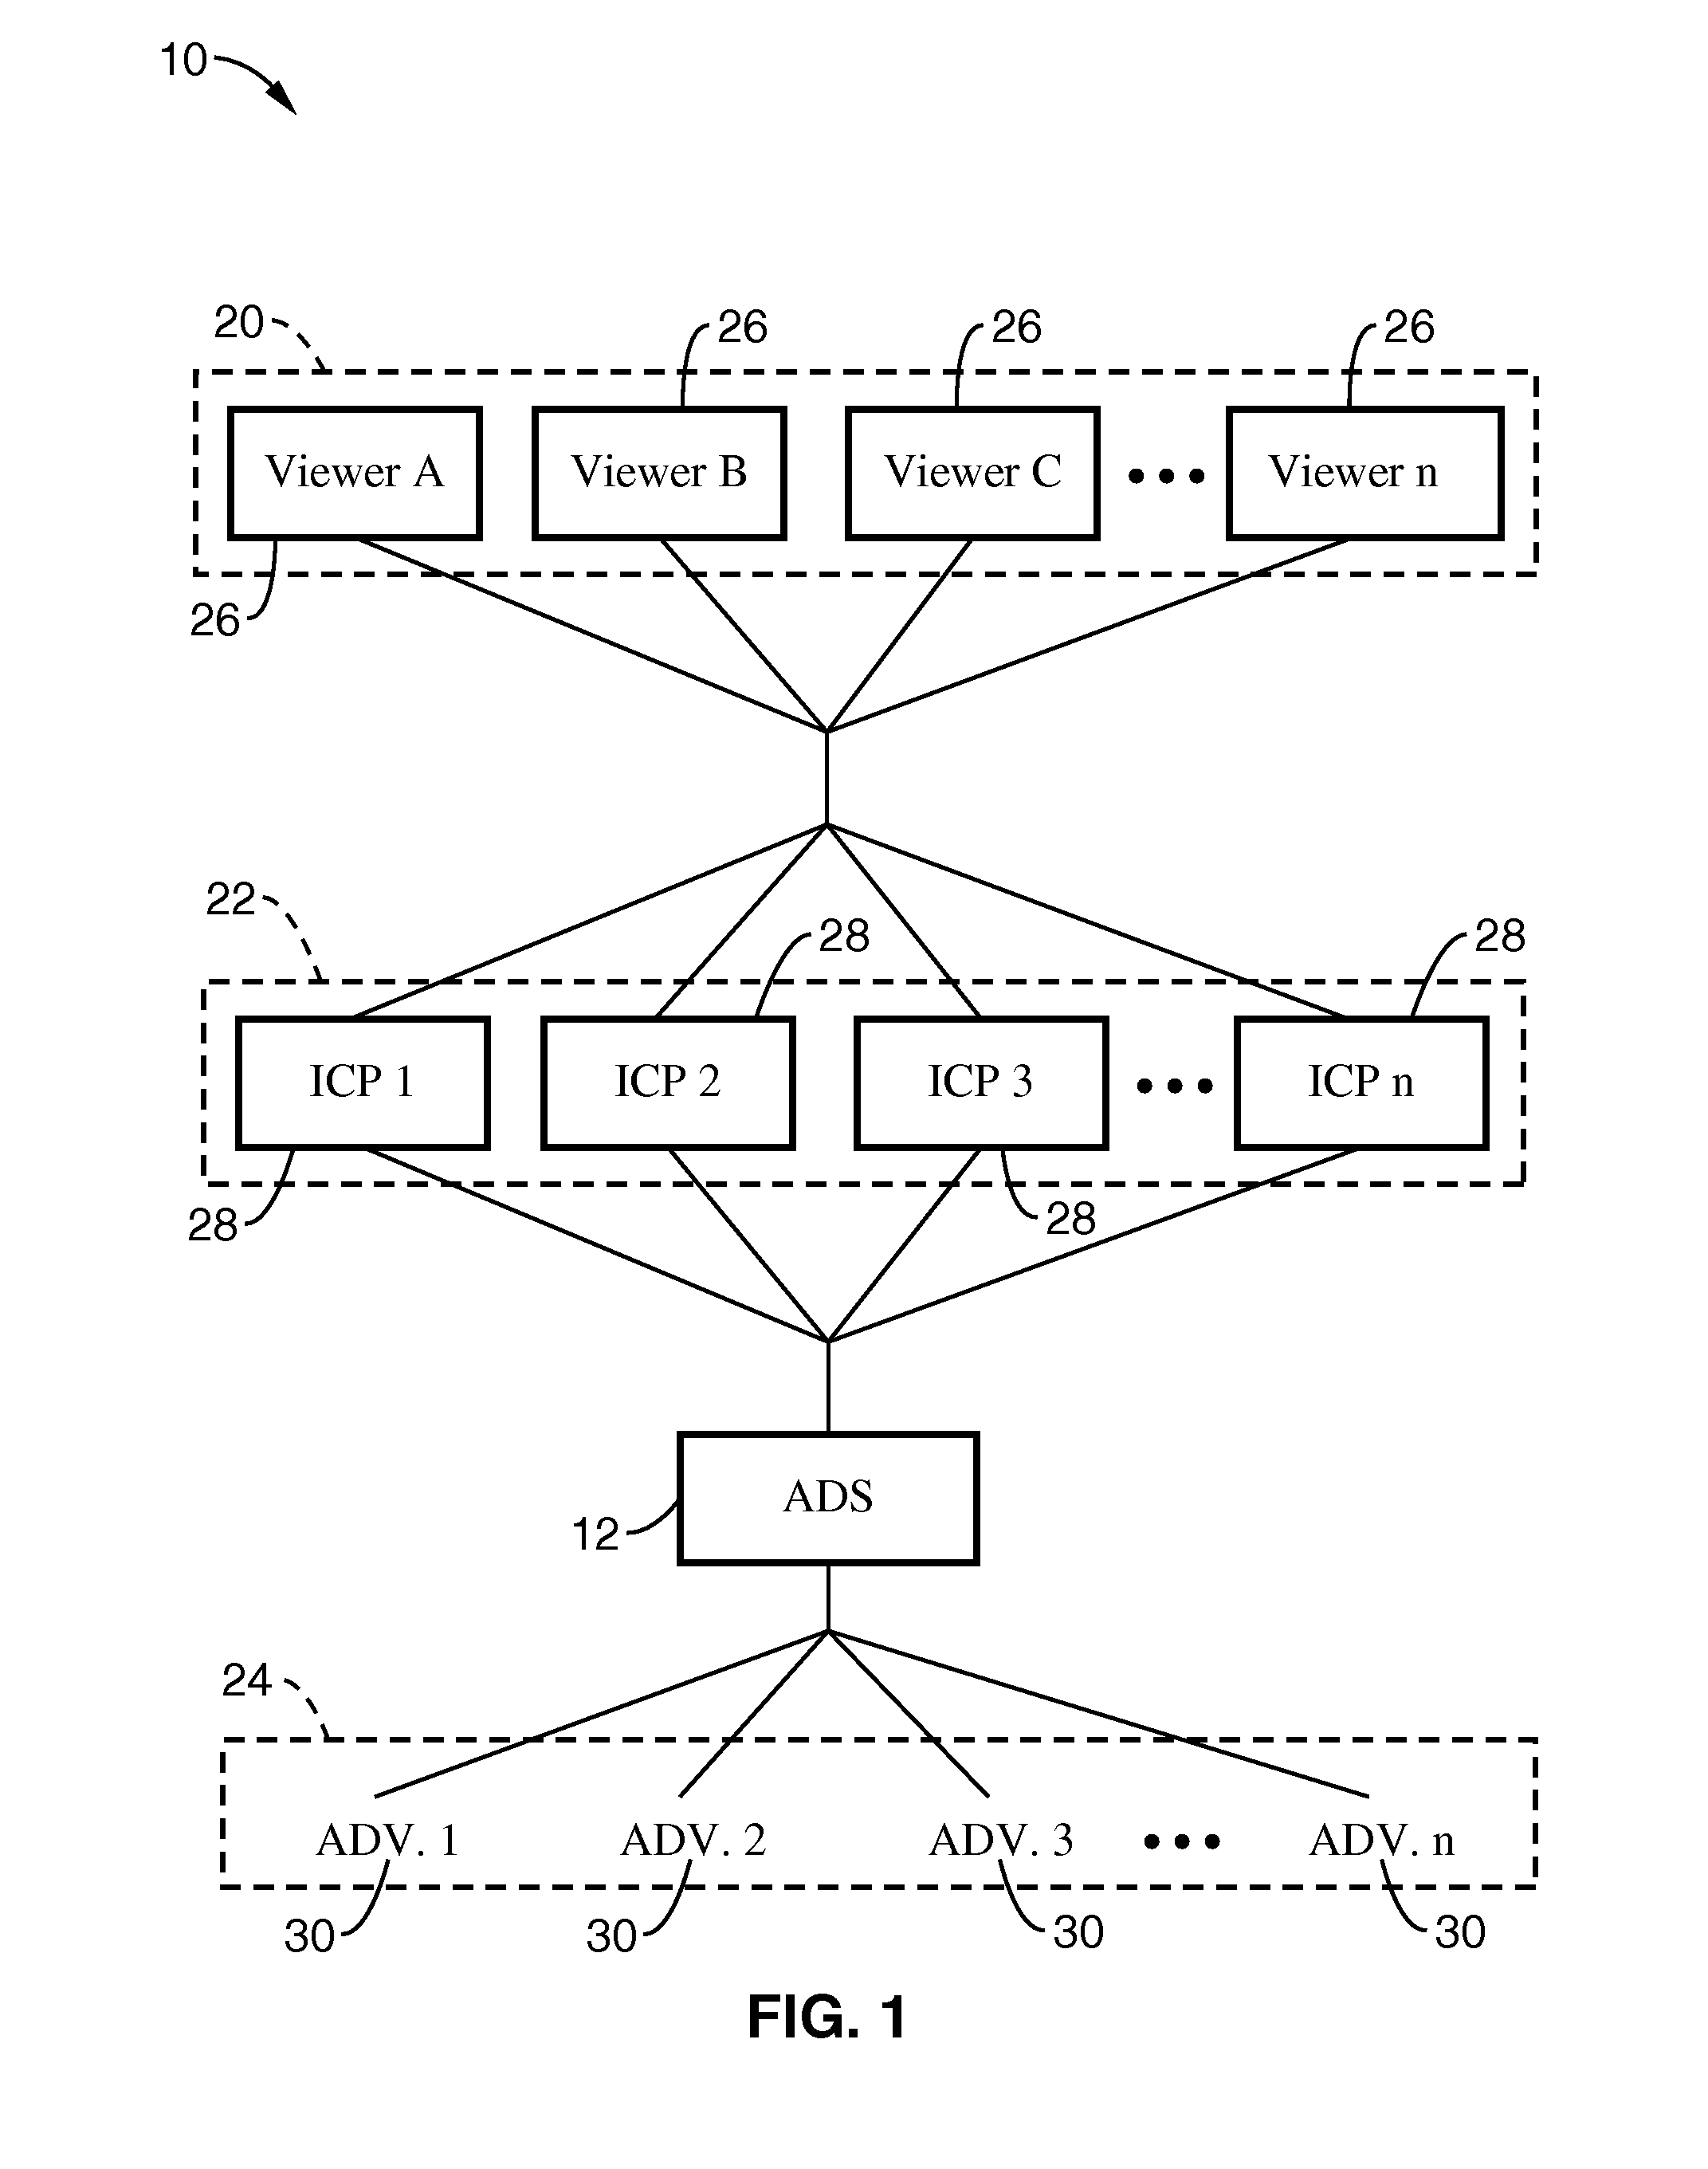 System and method for internet TV and broadcast advertisements